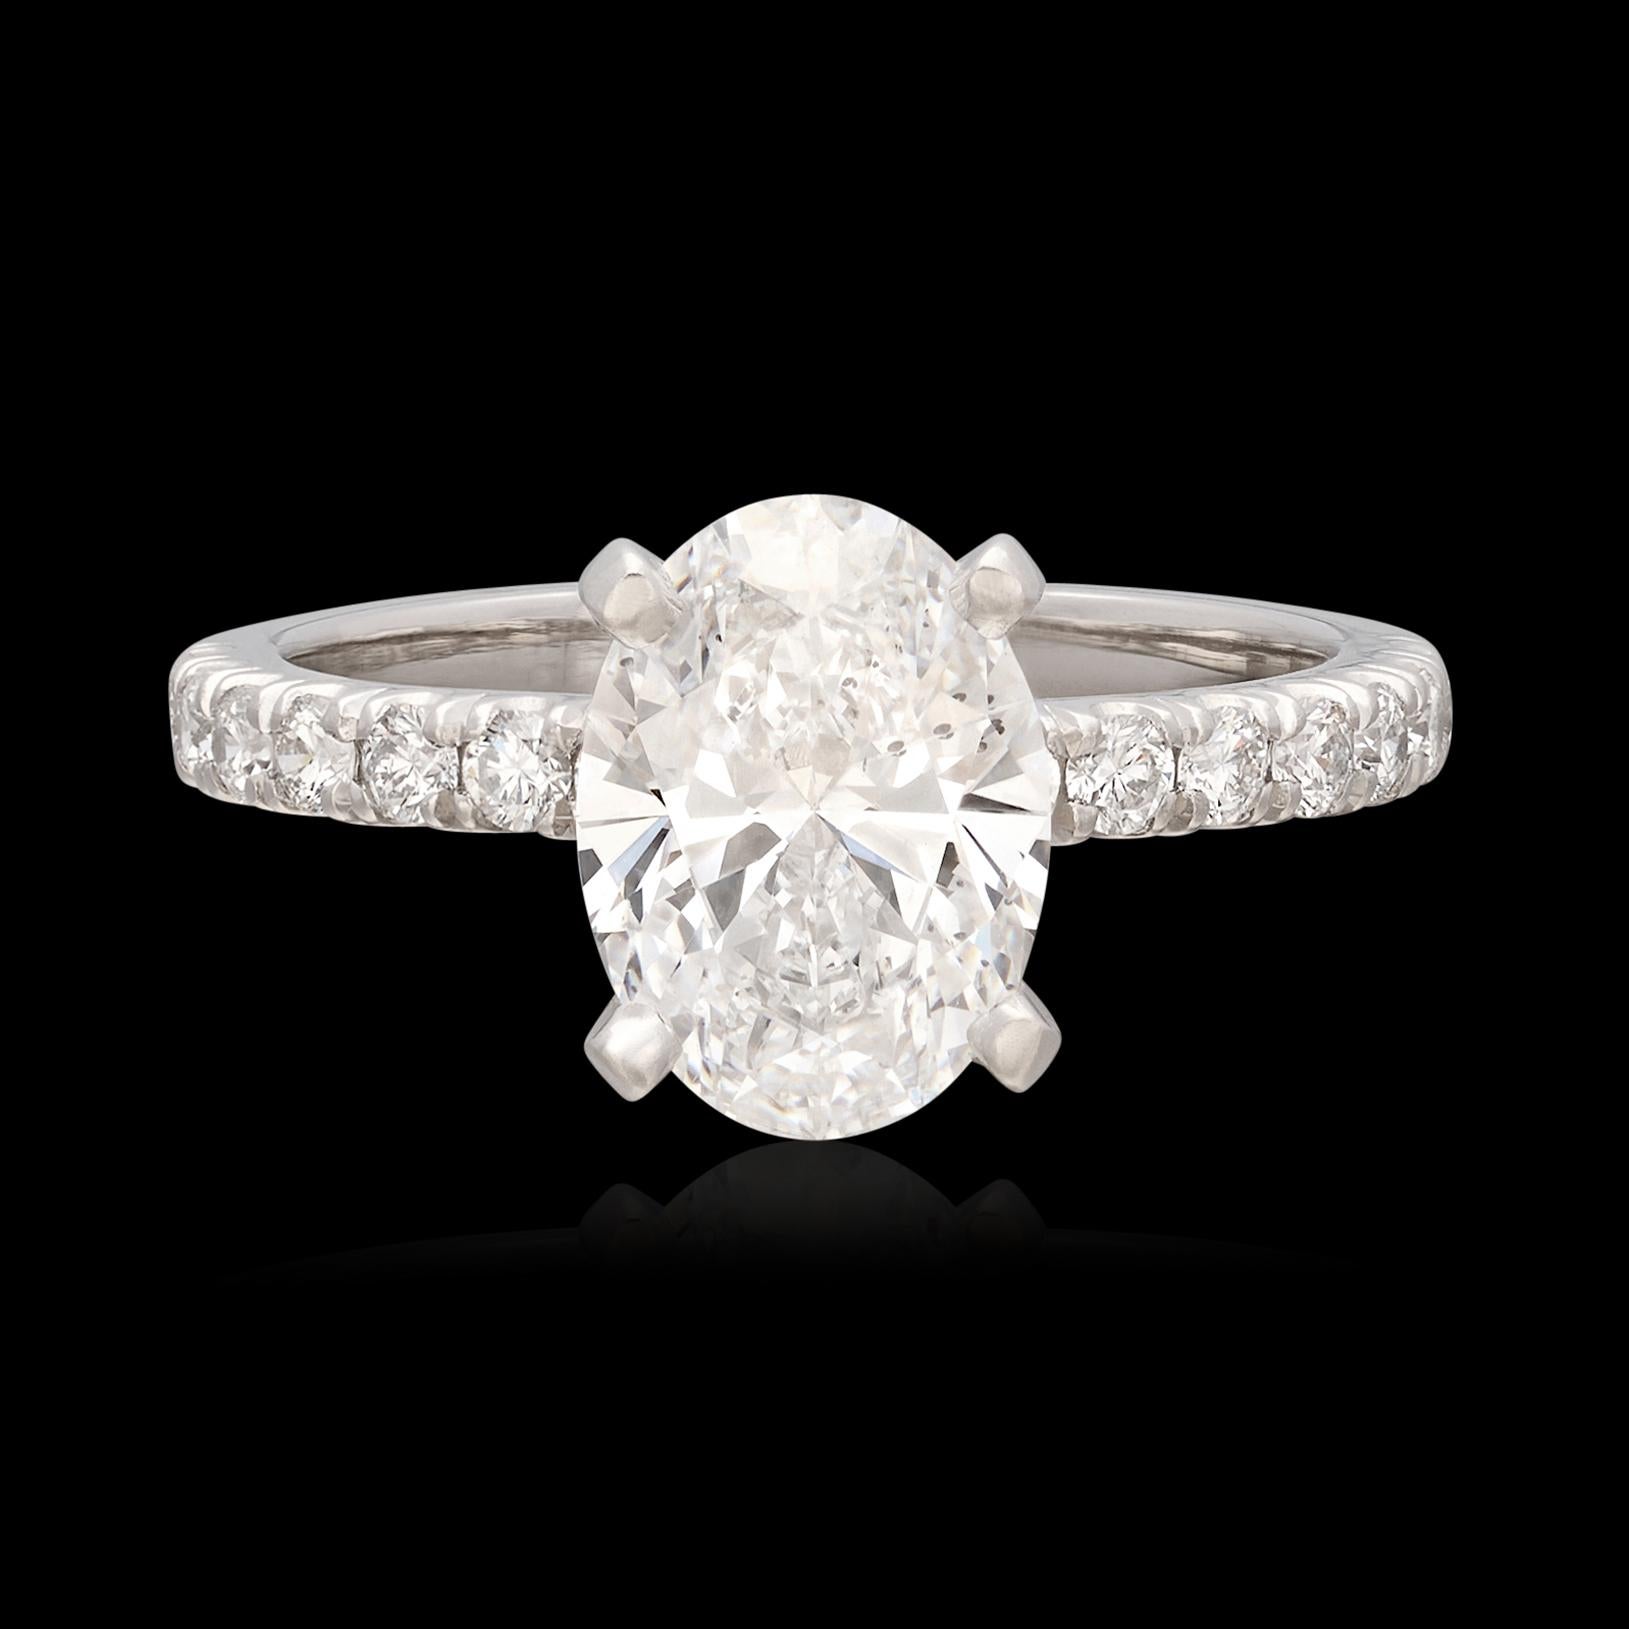 Looking to stand out from the crowd? This gorgeous platinum diamond ring is sure to do the trick. Featuring a GIA graded 1.80 carat Oval Diamond expertly set with 4 prongs in a classic Platinum setting with 14 fine melee diamonds set in the shank